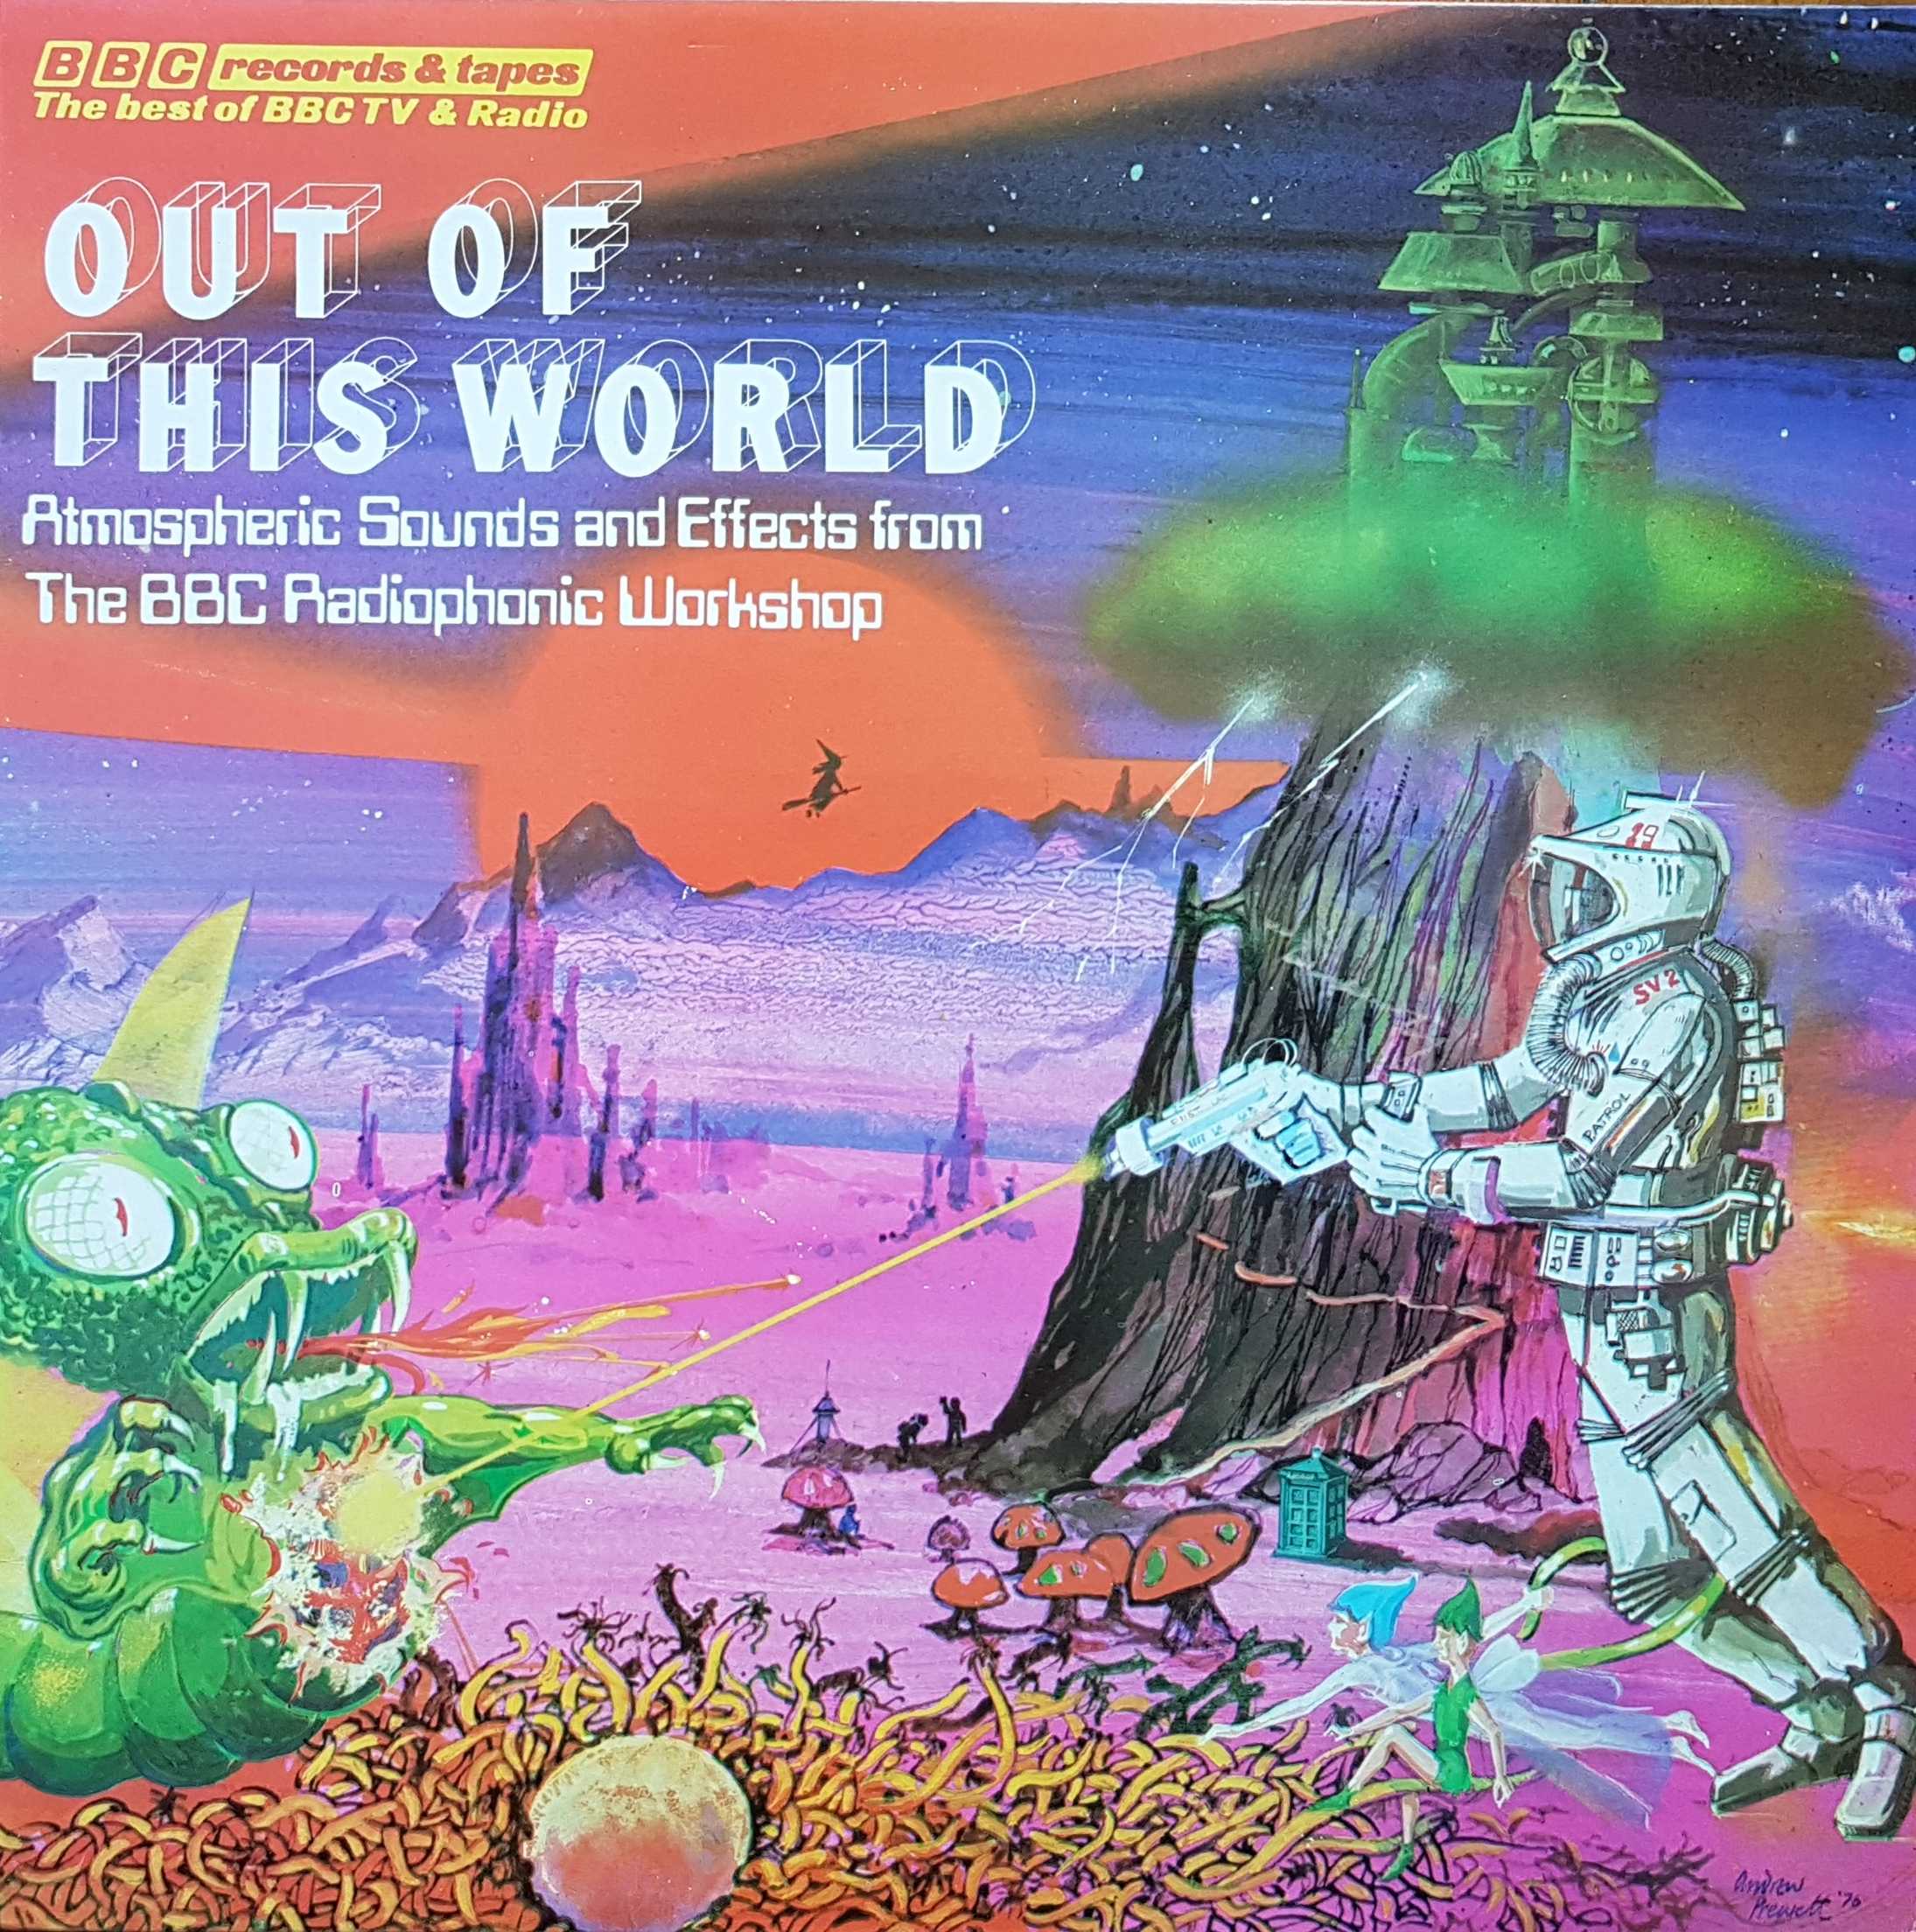 Picture of REC 225 Out of this World by artist Various from the BBC albums - Records and Tapes library